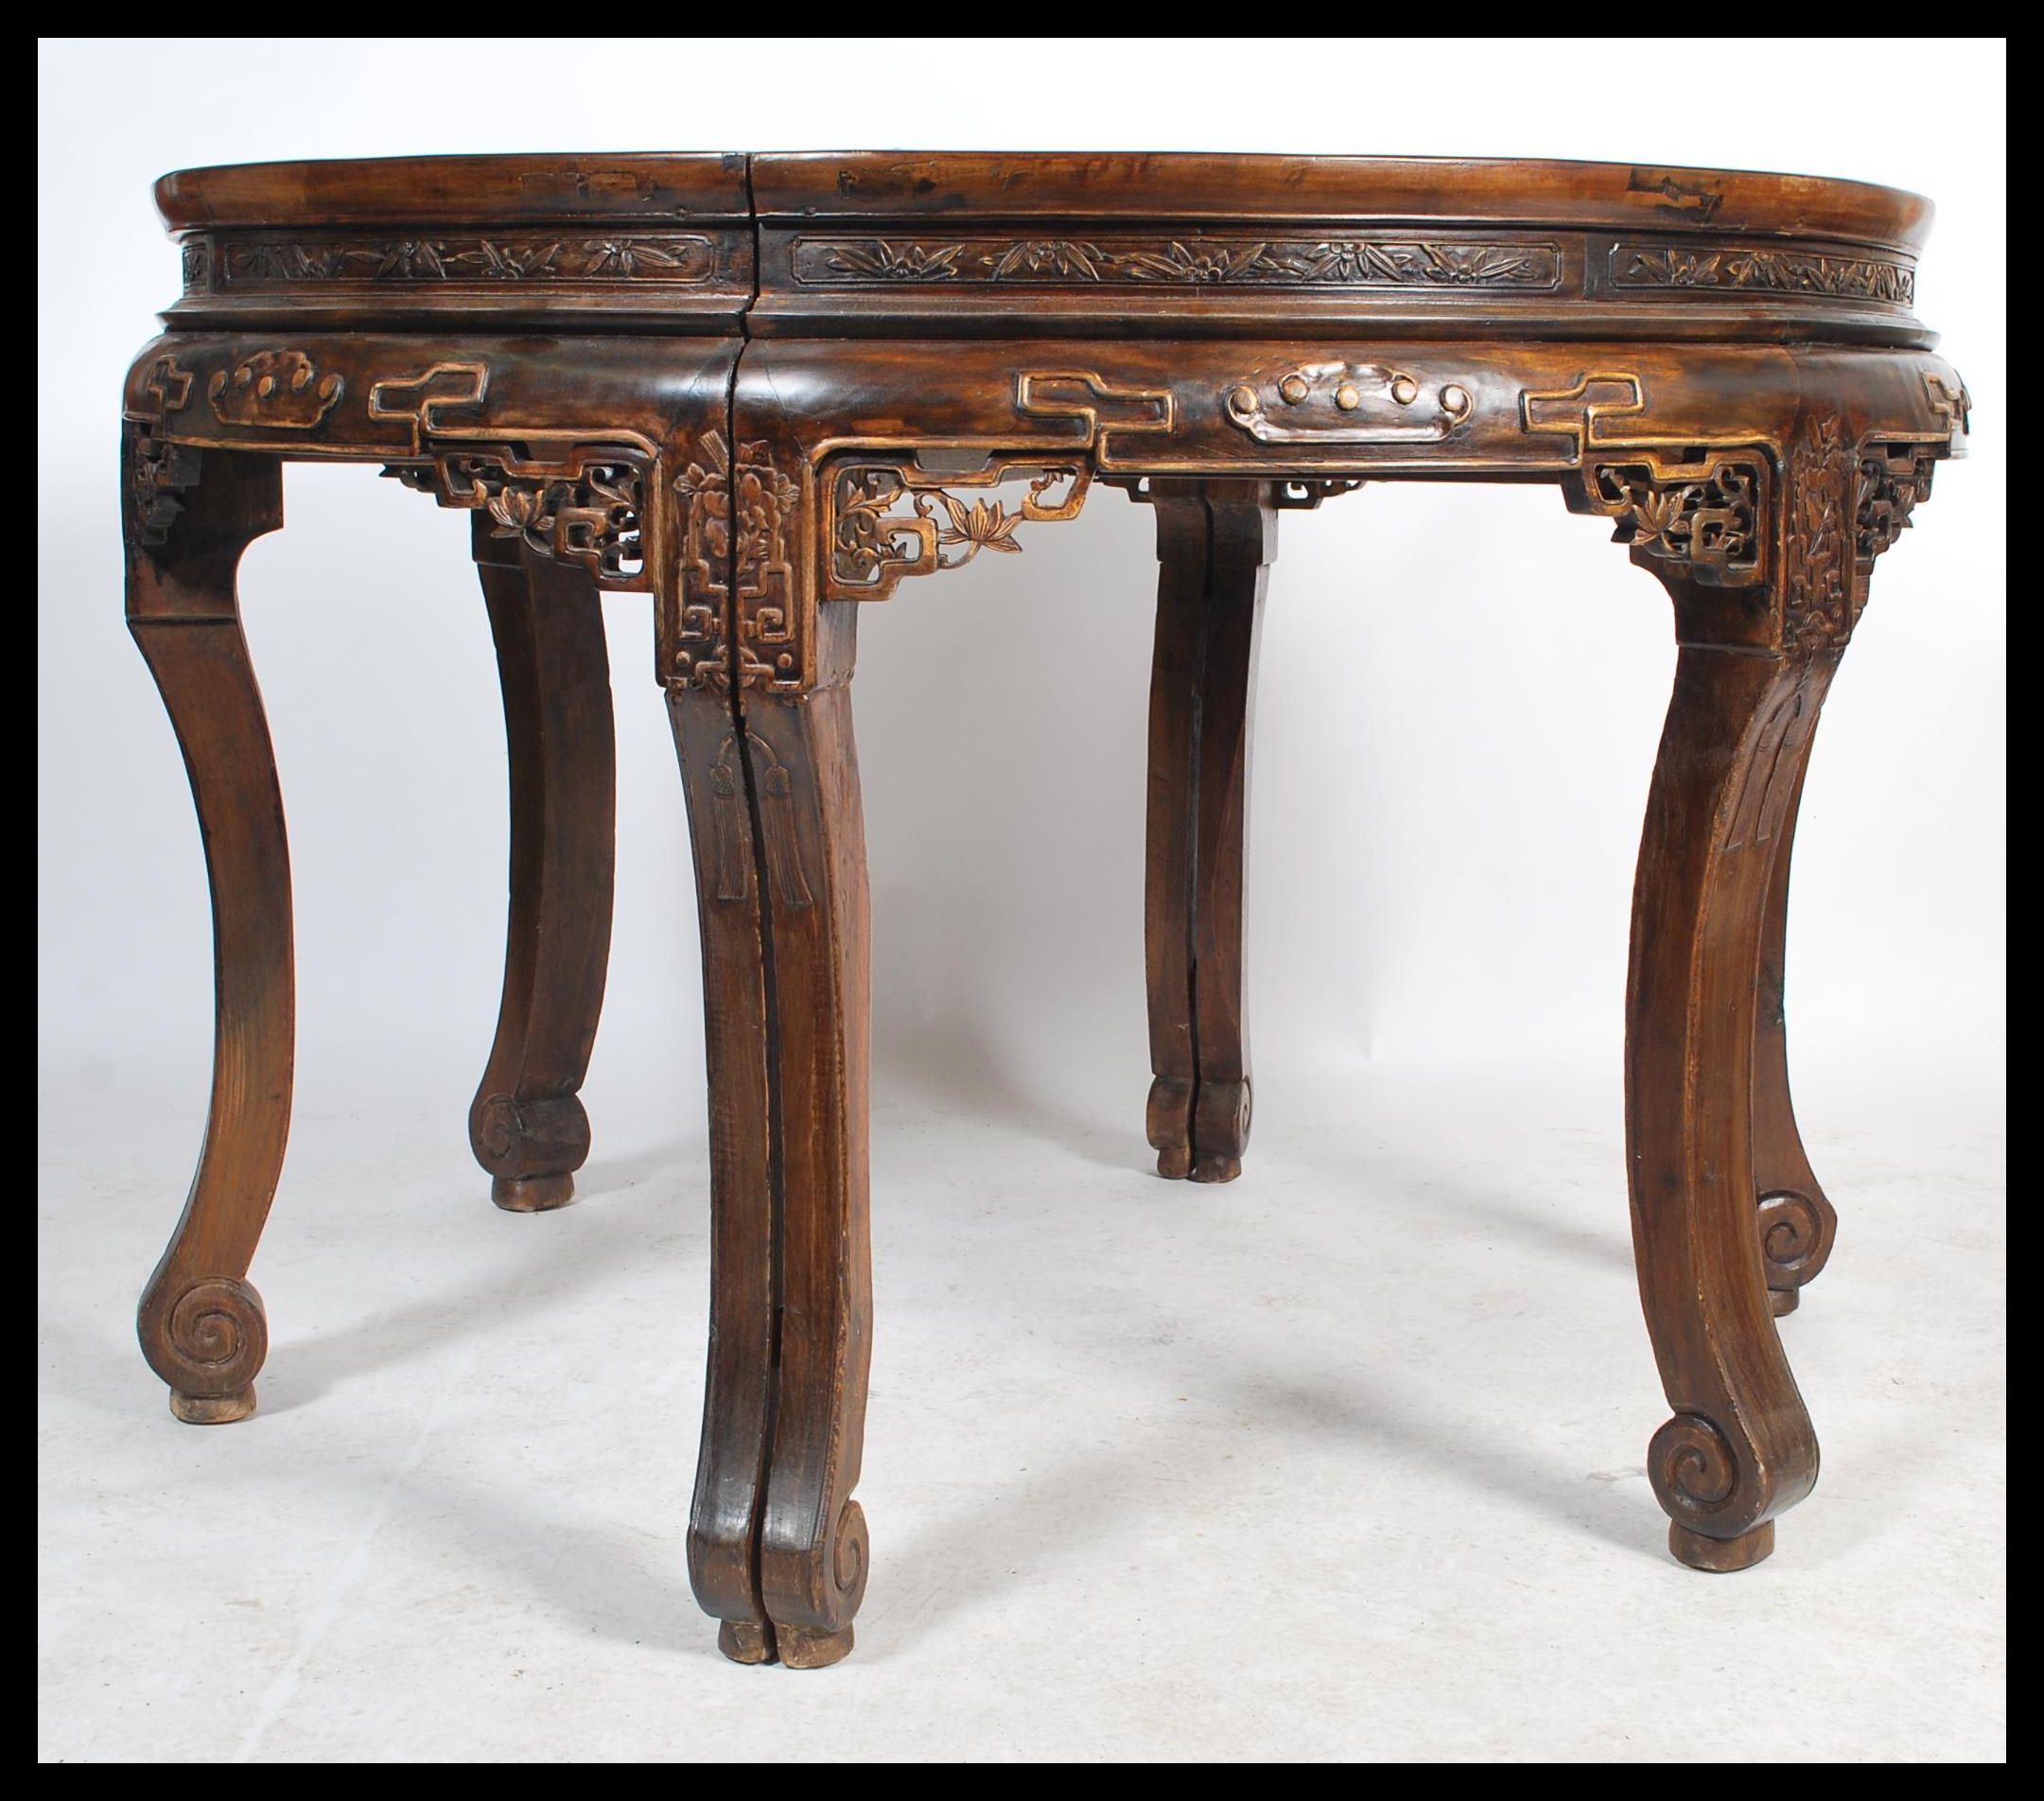 A large antique 20th century Chinese circular dining table from the Zhejiang province. The table